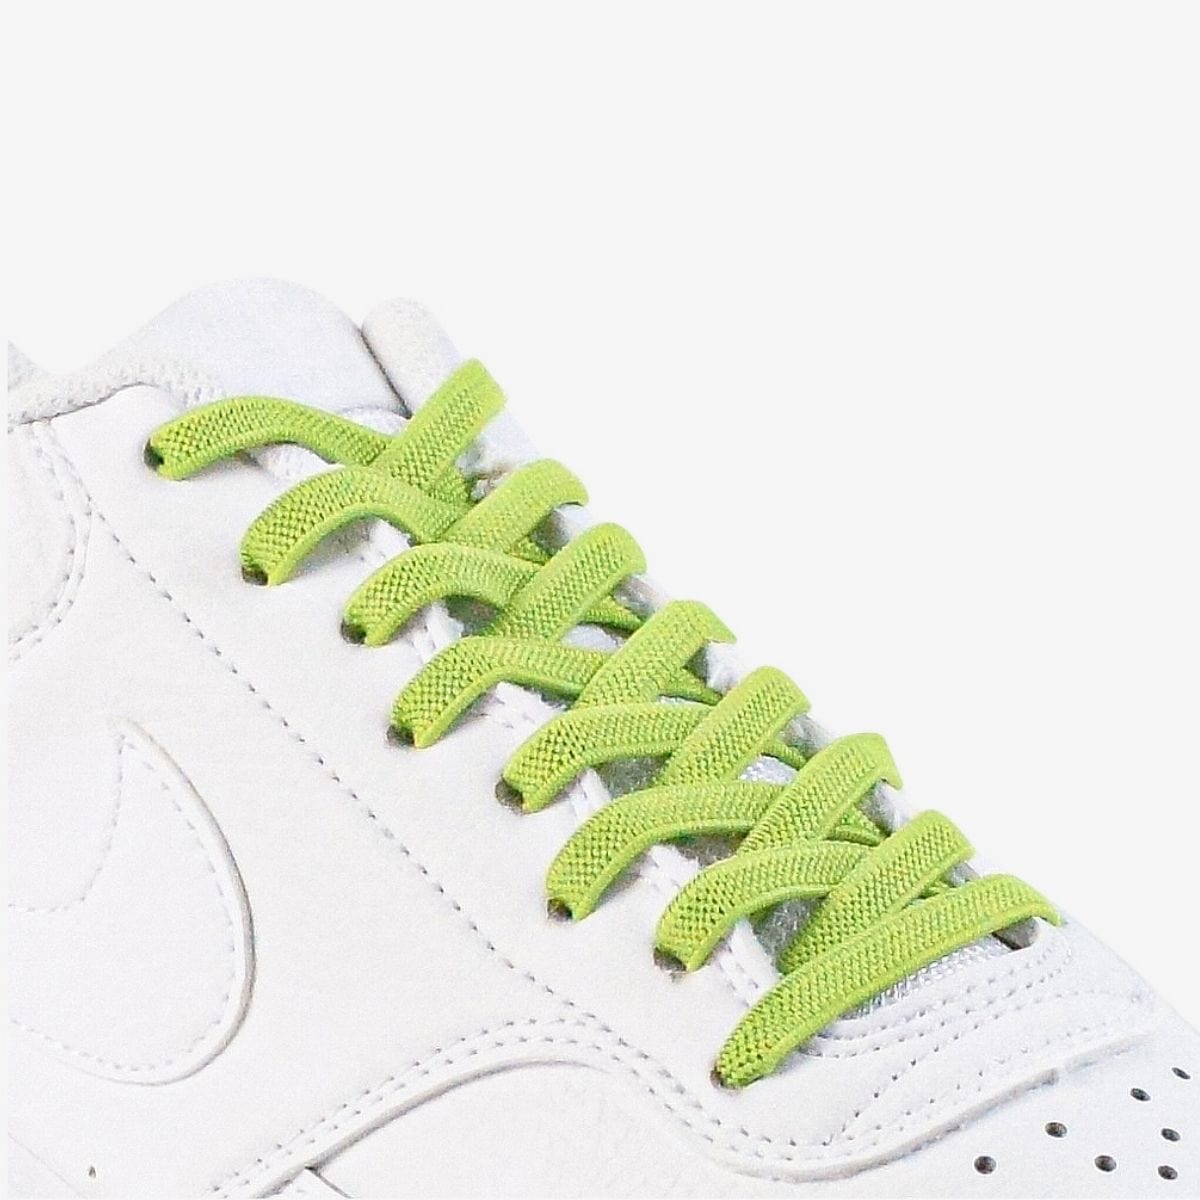 kids-no-tie-shoelaces-with-bright-green-laces-on-nike-white-sneakers-by-kicks-shoelaces